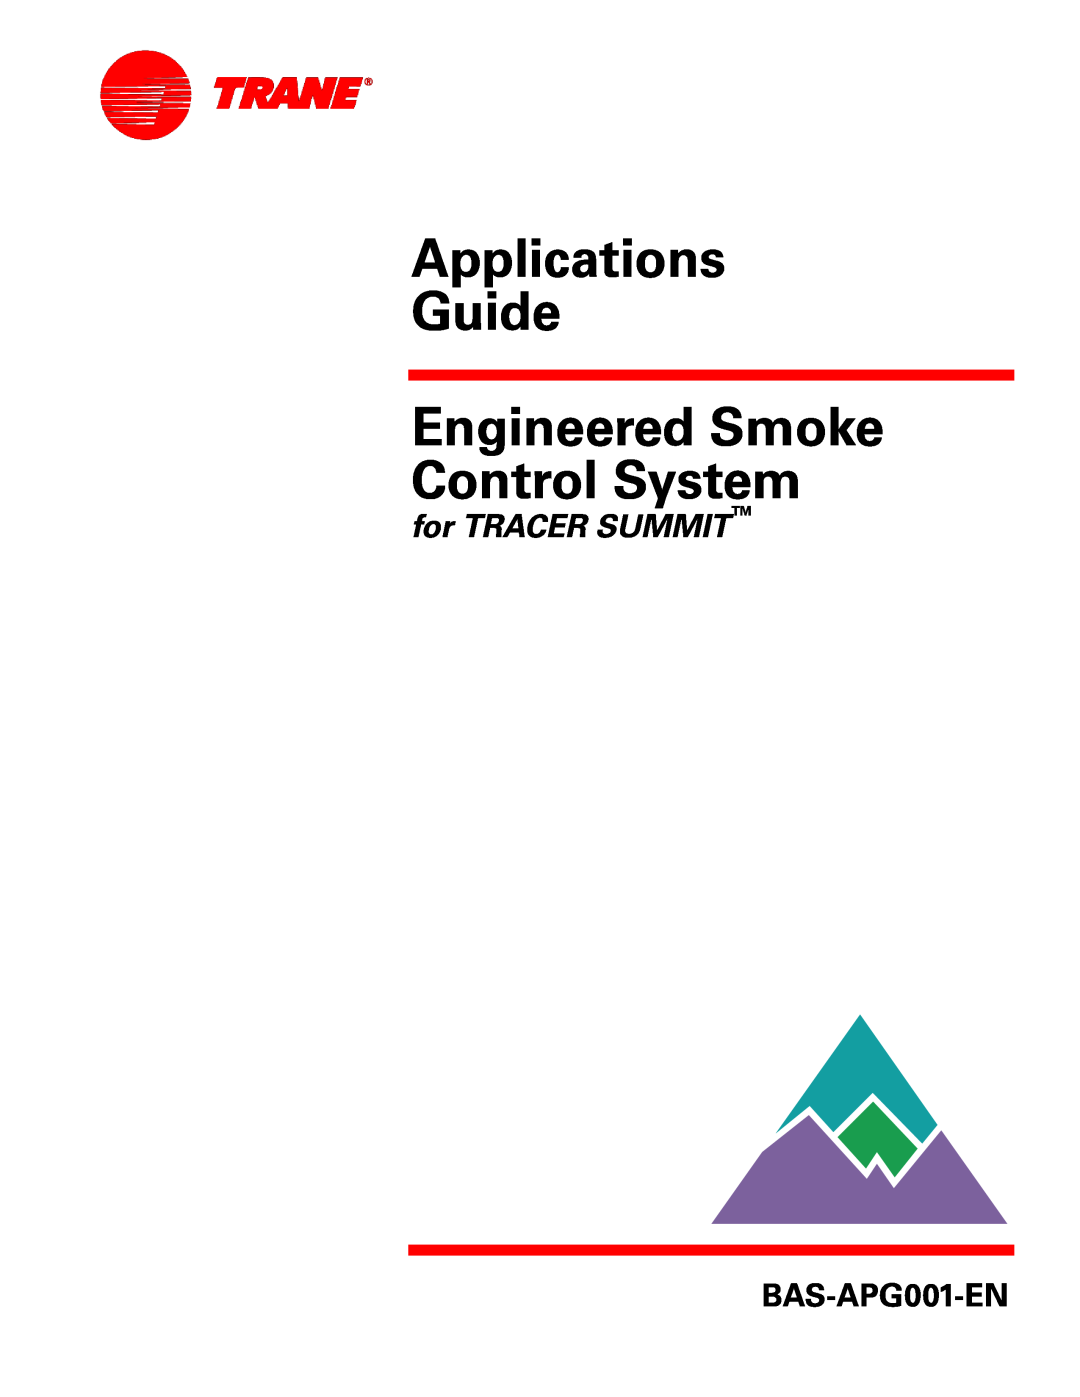 Trane Engineered Smoke Control System for Tracer Summit manual Applications Guide, for TRACER SUMMIT, BAS-APG001-EN 